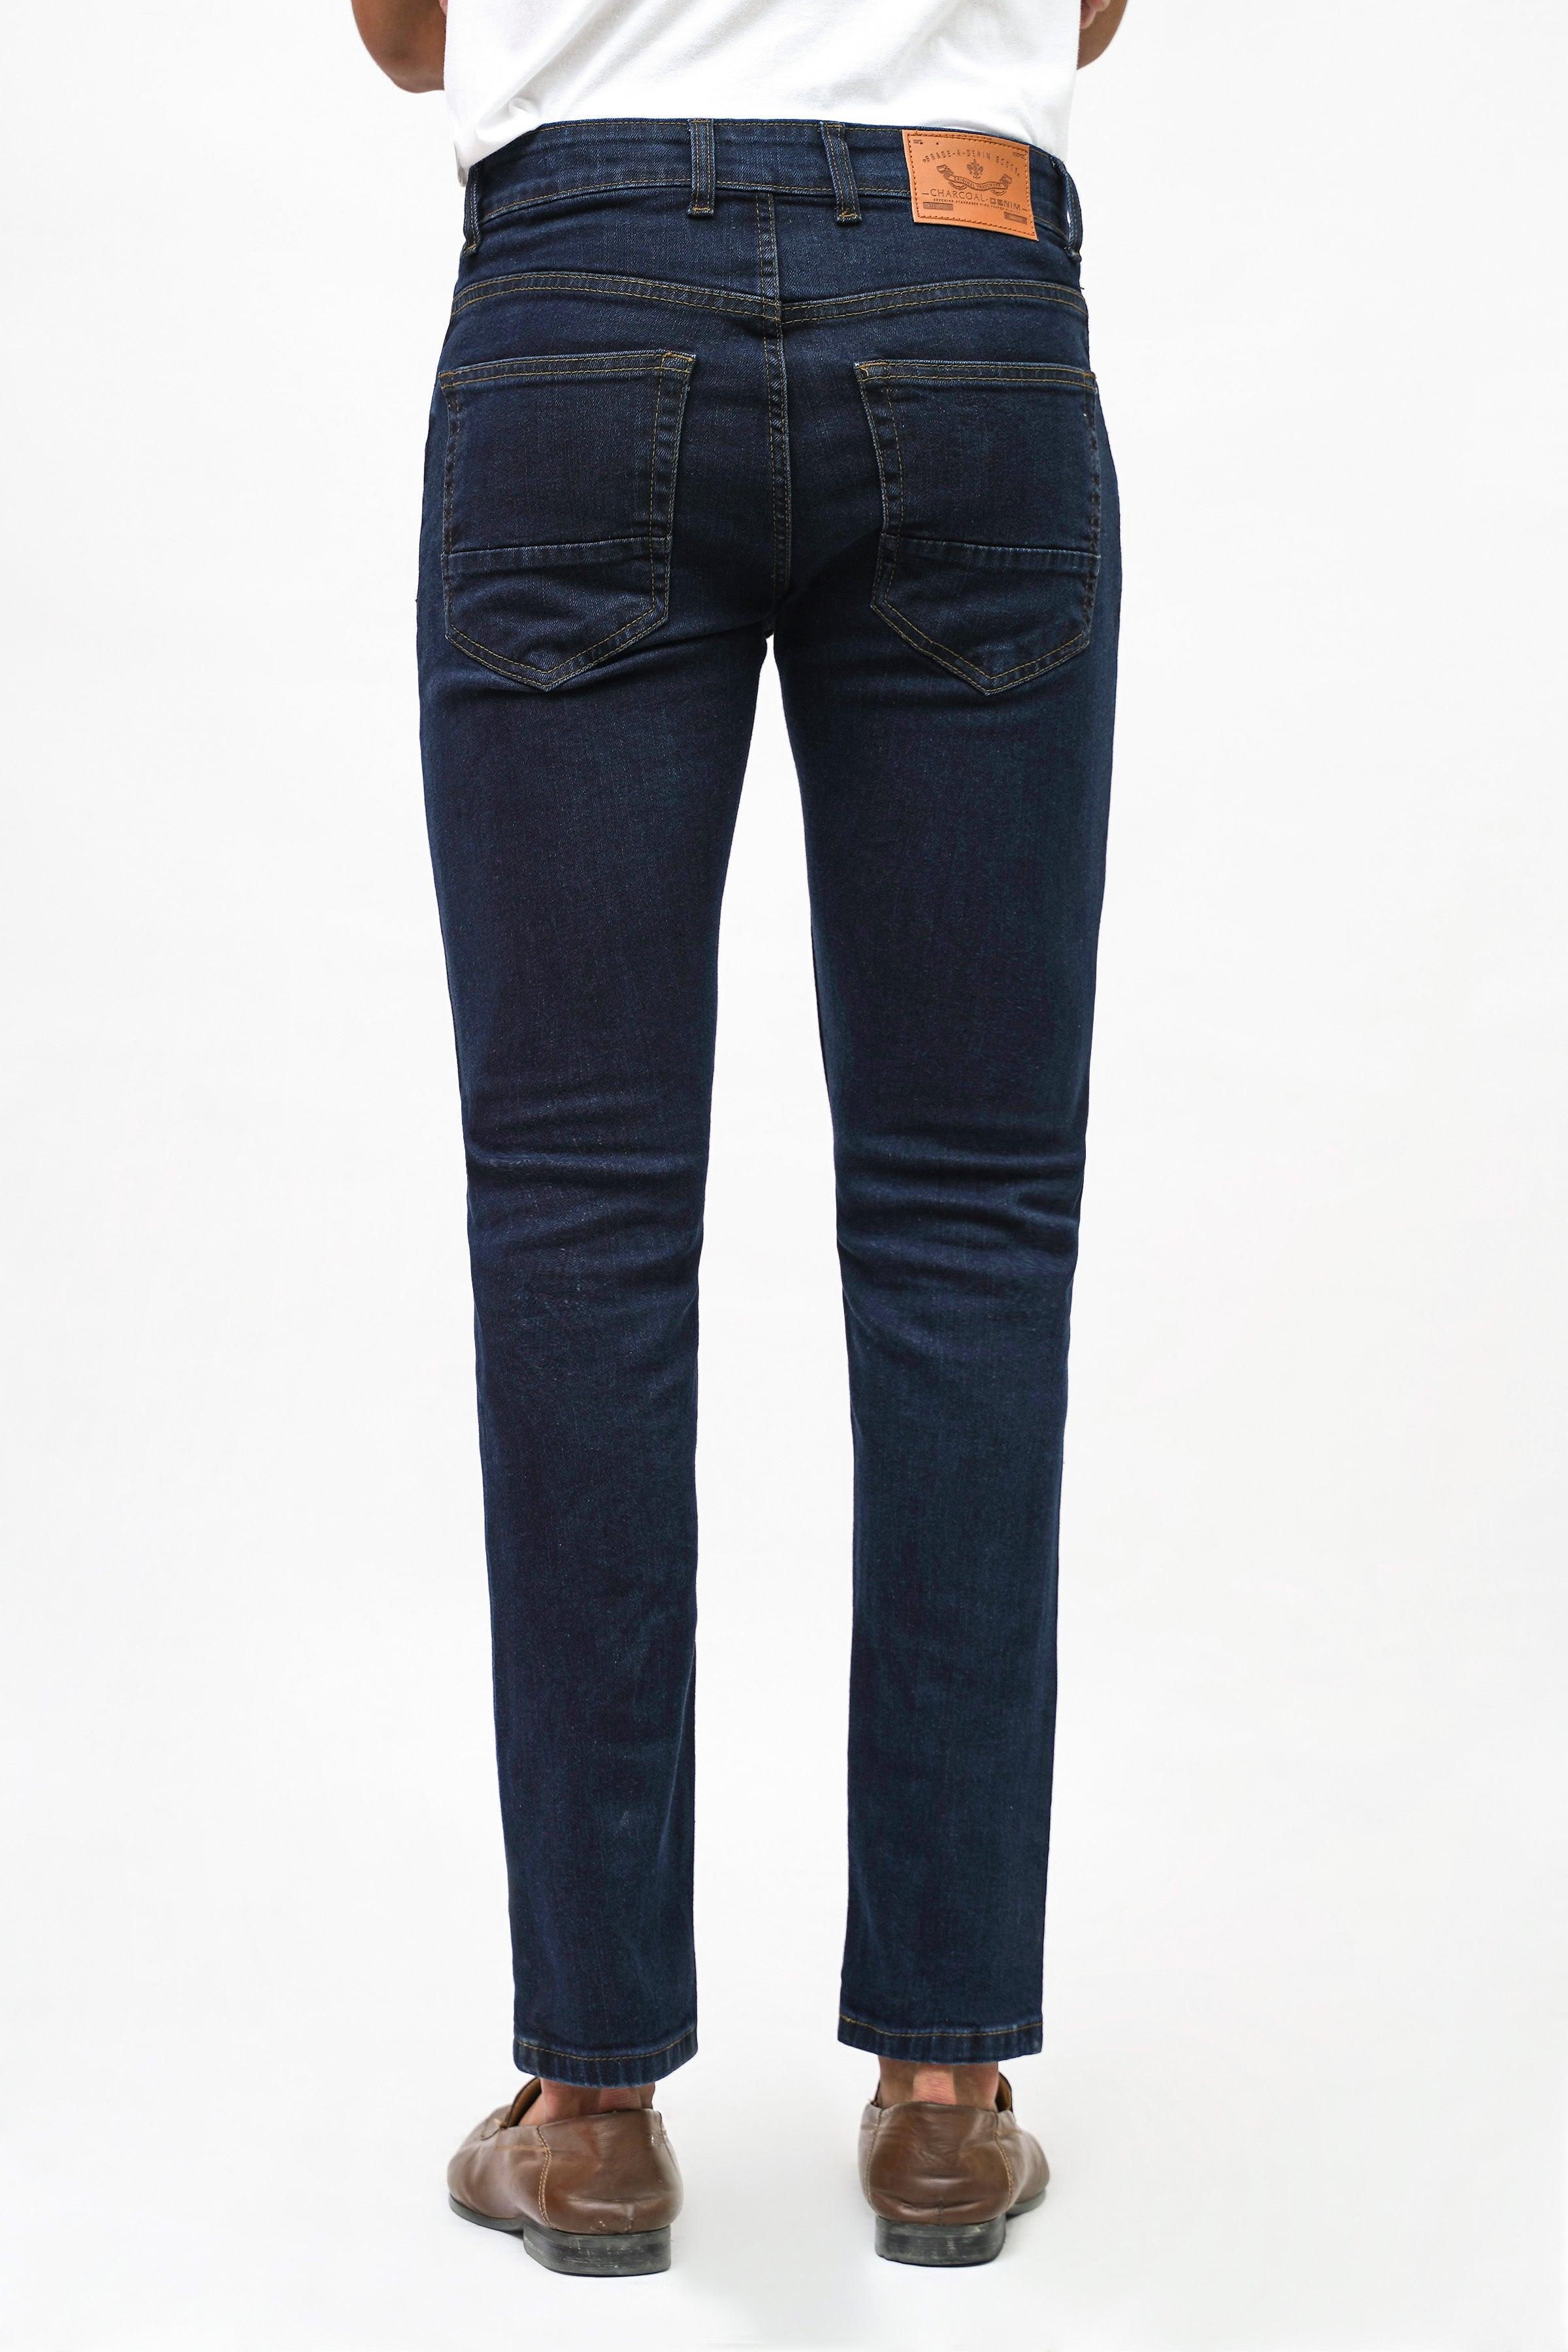 SLIM FIT DARK BLUE JEANS at Charcoal Clothing